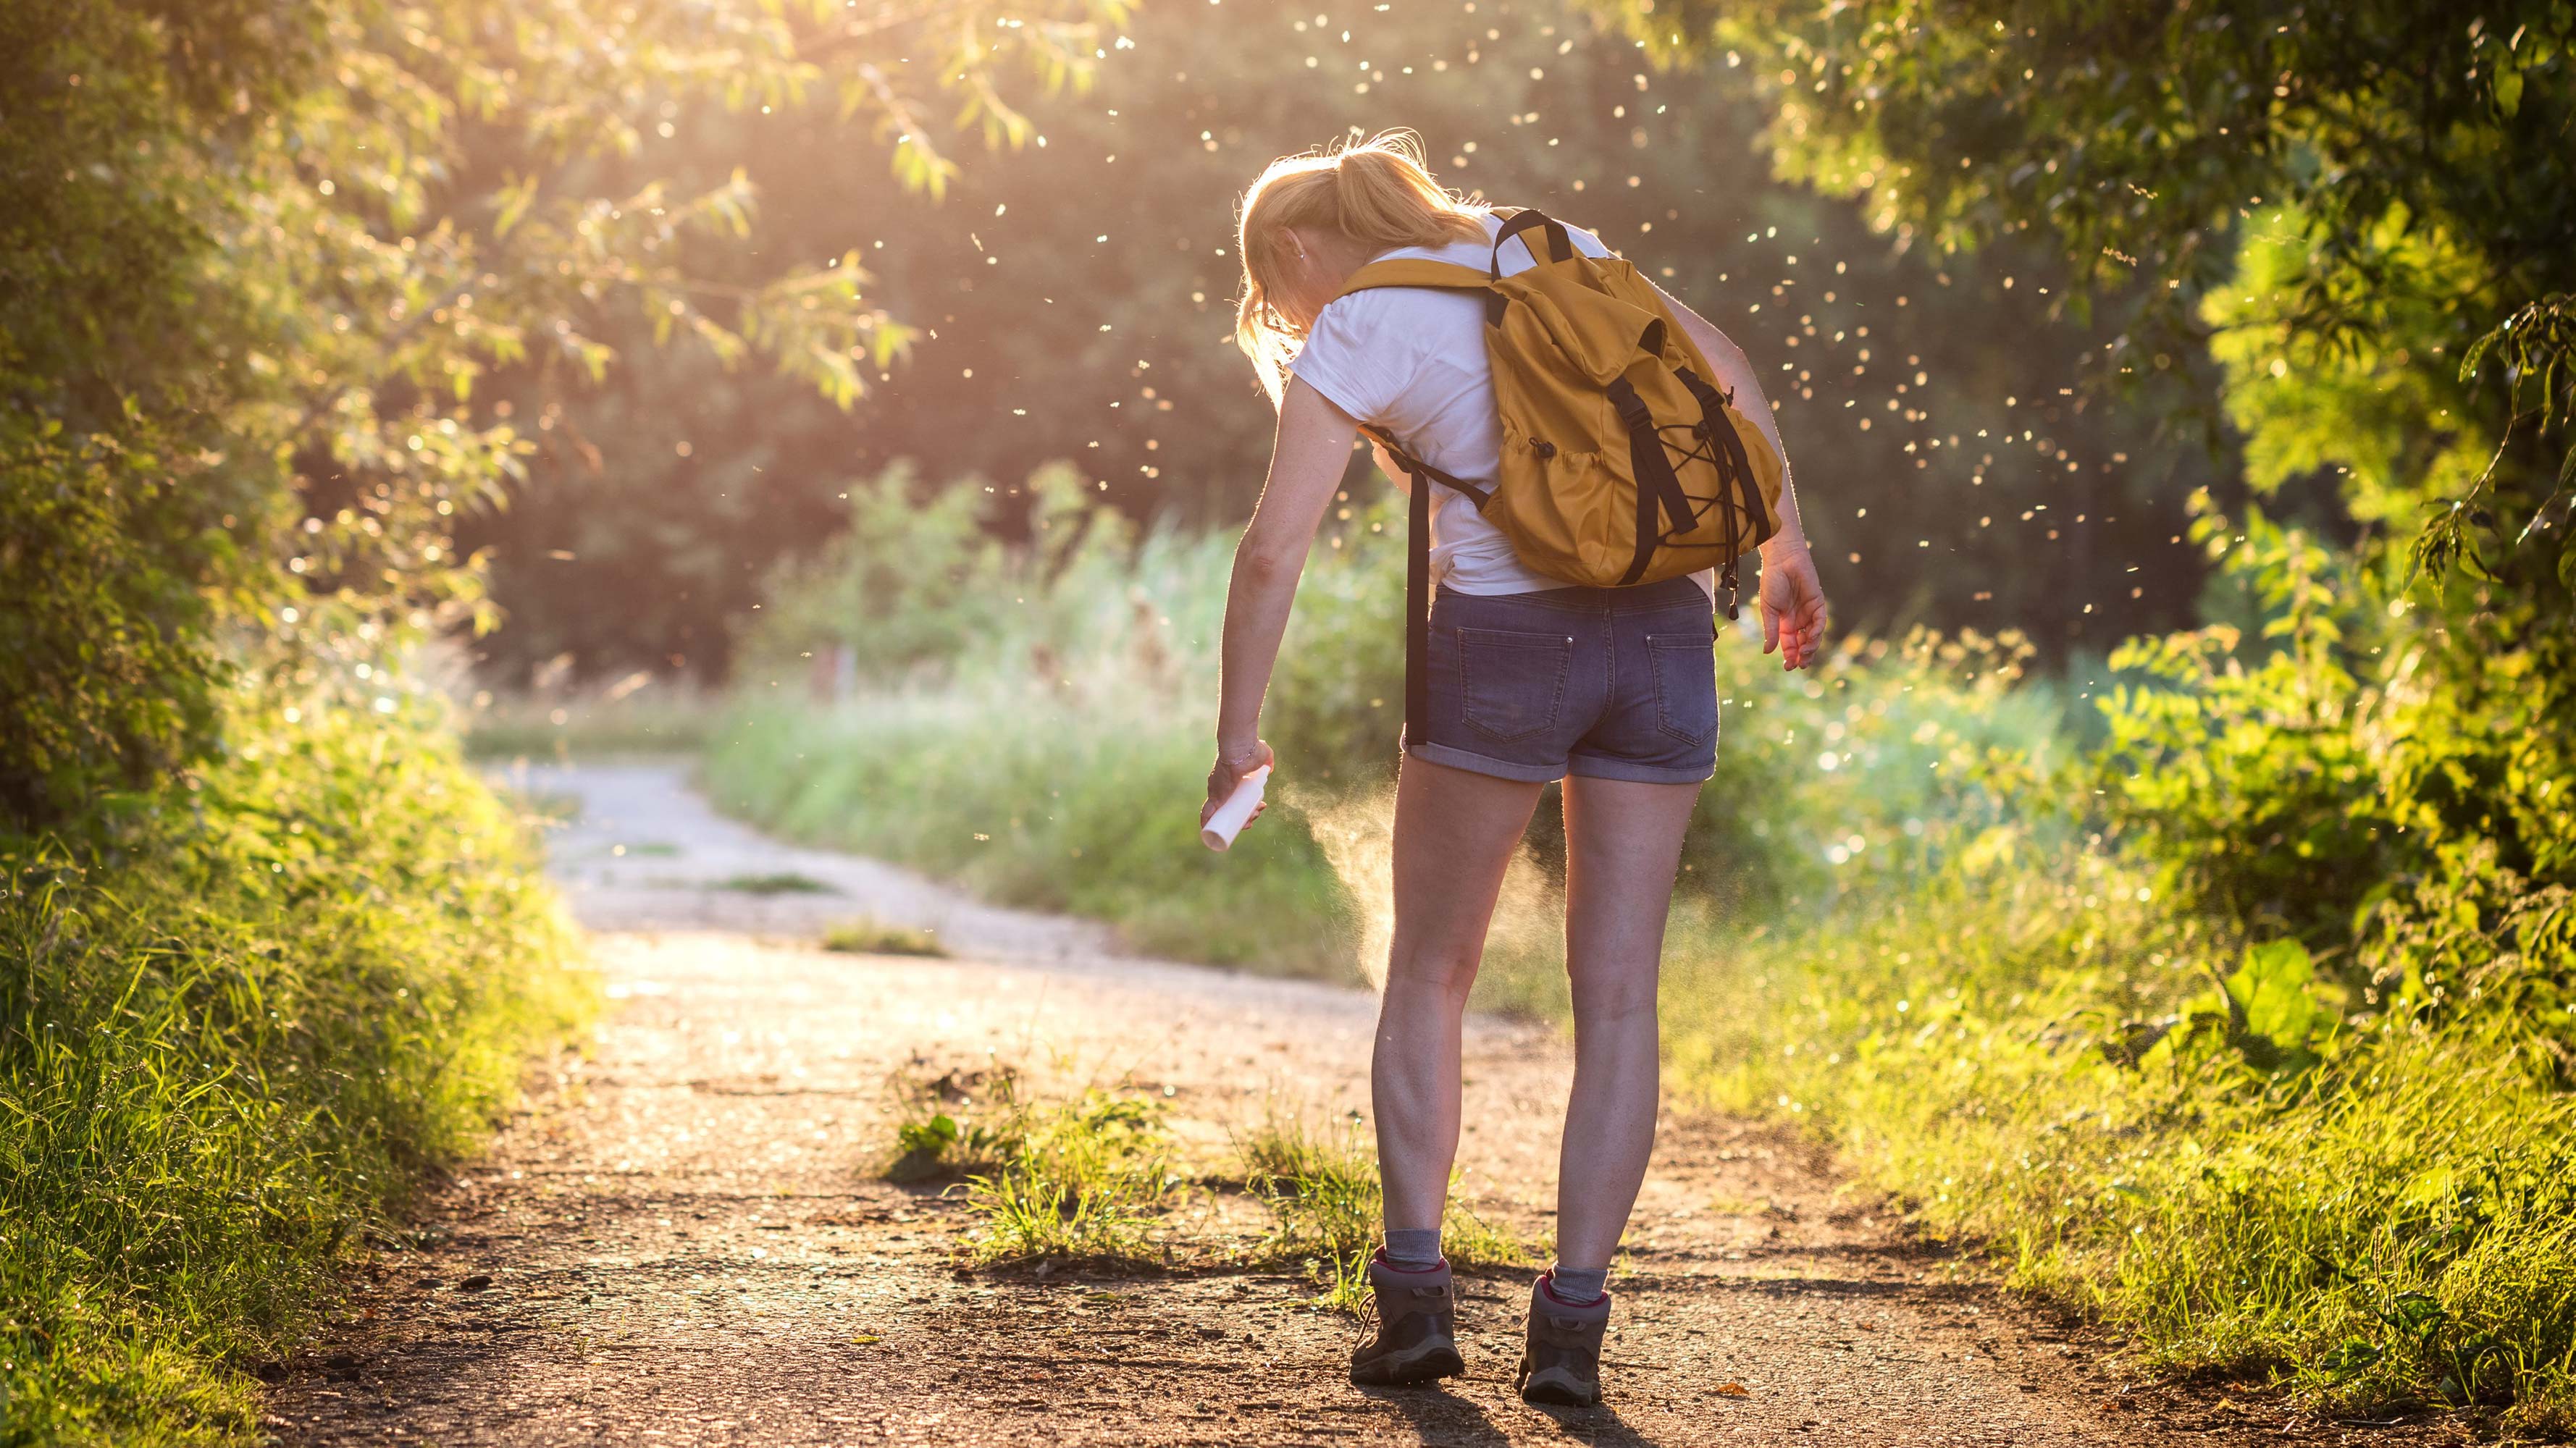 A young woman, wearing hiking gear, walks a trail while spraying herself with bugs. A swarm of flying bugs is ahead of her on the trail.